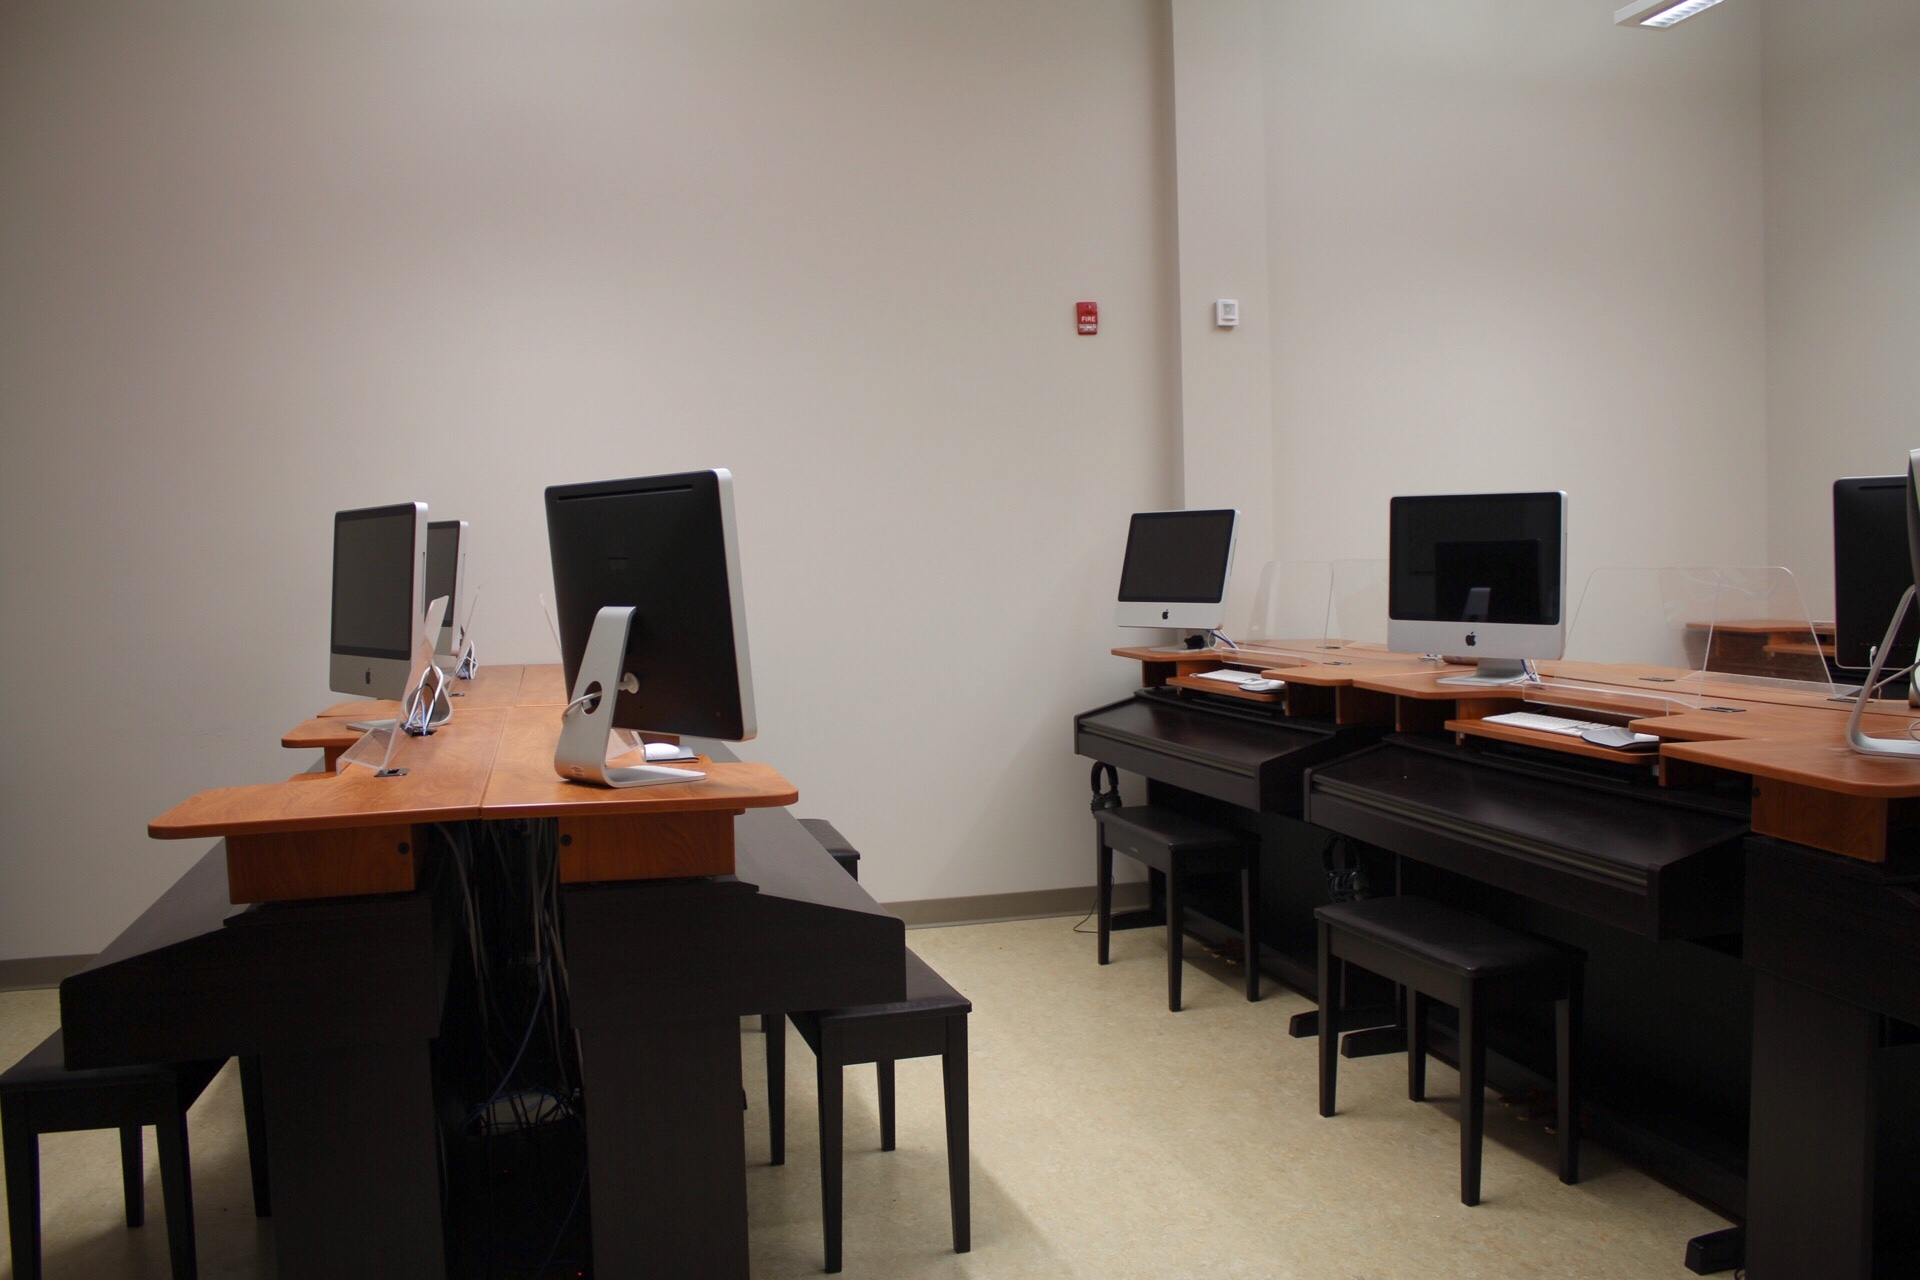 Another view of the work stations and electronic keyboards in the Jindra Fine Arts Music Lab.